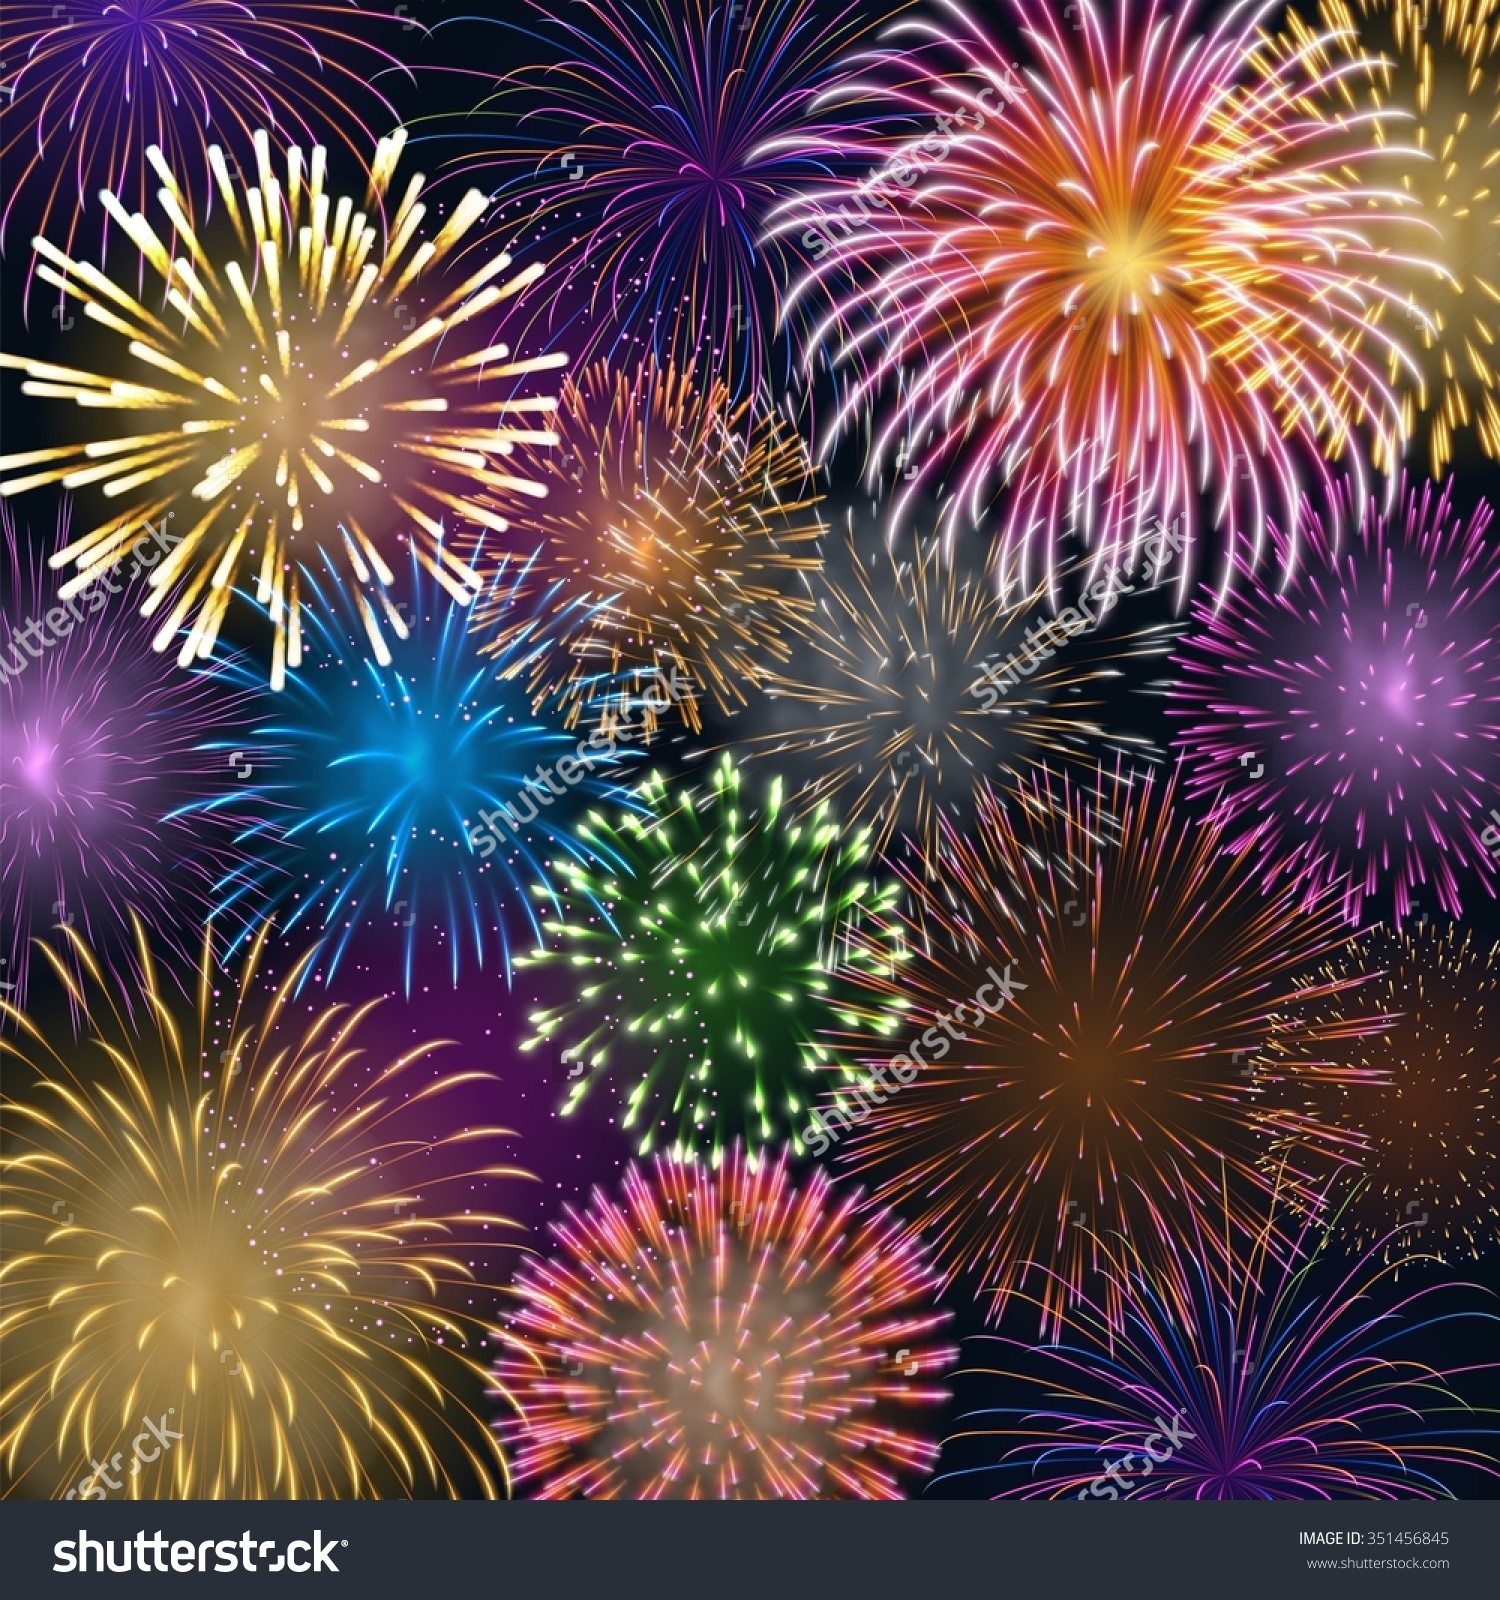 Background with Colorful Fireworks